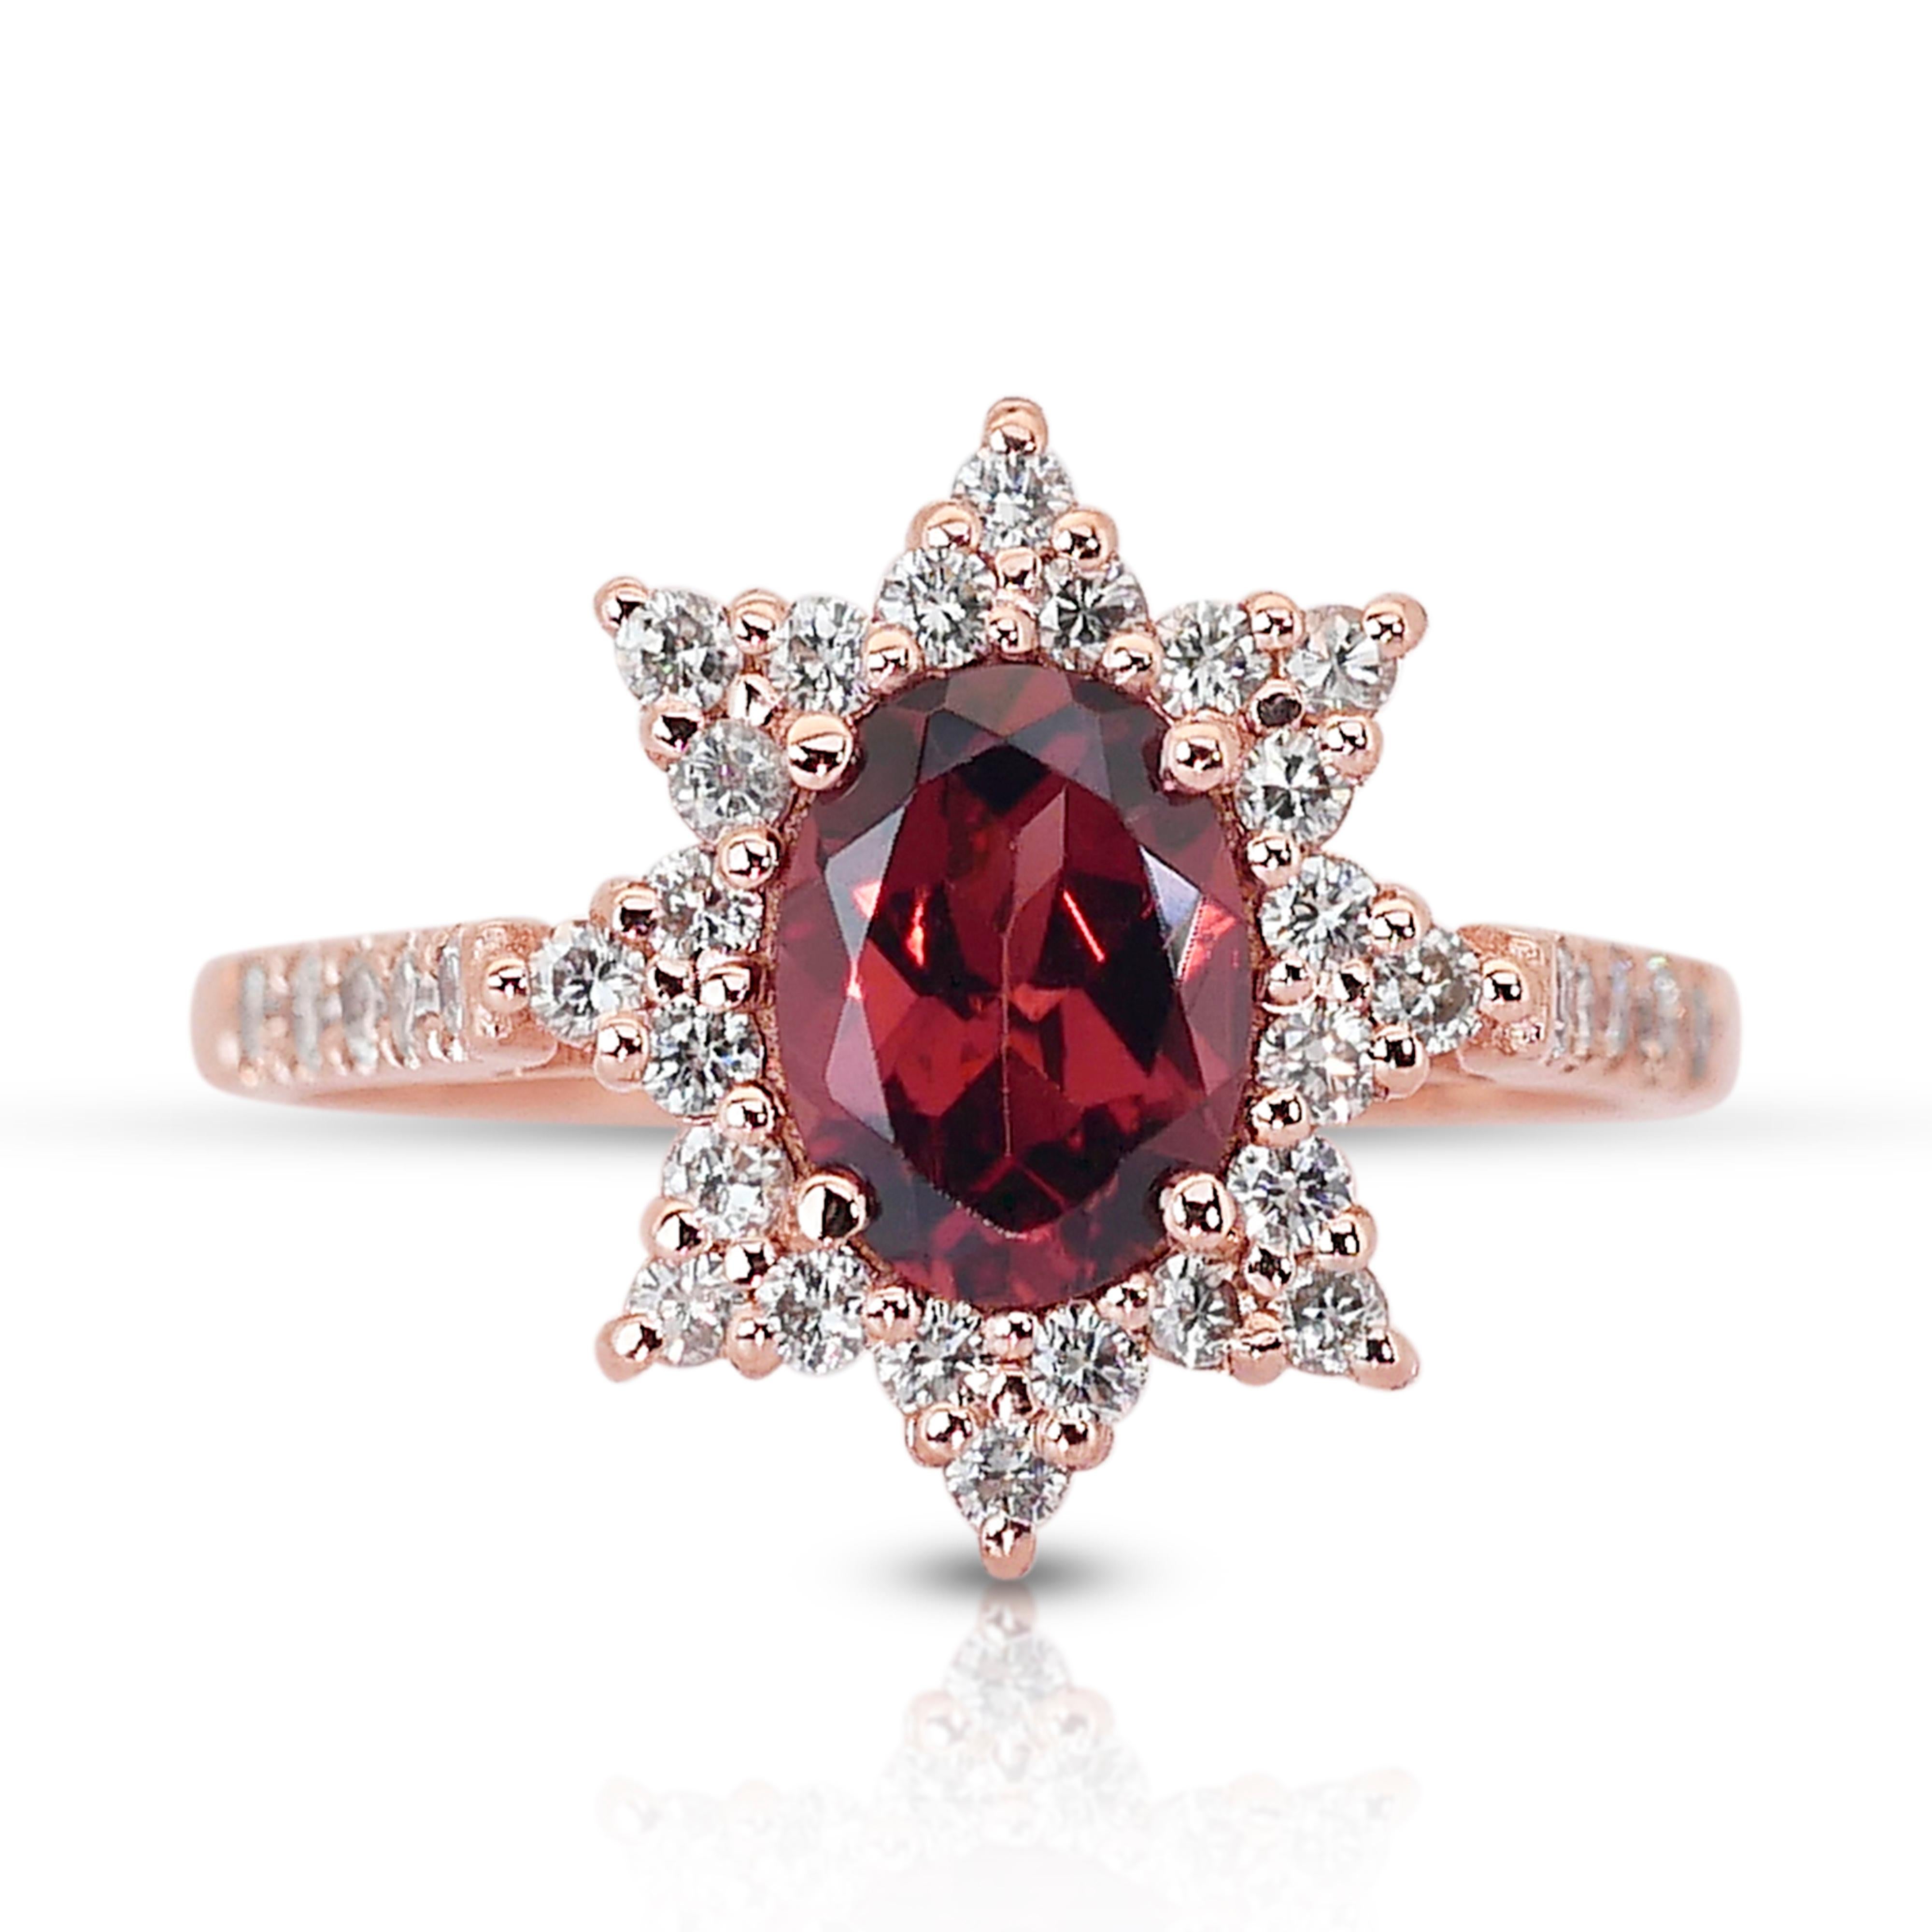 Captivating 14k Rose Gold Garnet and Diamond Halo Ring w/1.87 ct - IGI Certified

This 14k rose gold halo ring stands as a testament to timeless elegance, featuring a magnificent 1.35 carat oval garnet at its center. The main stone captivates with